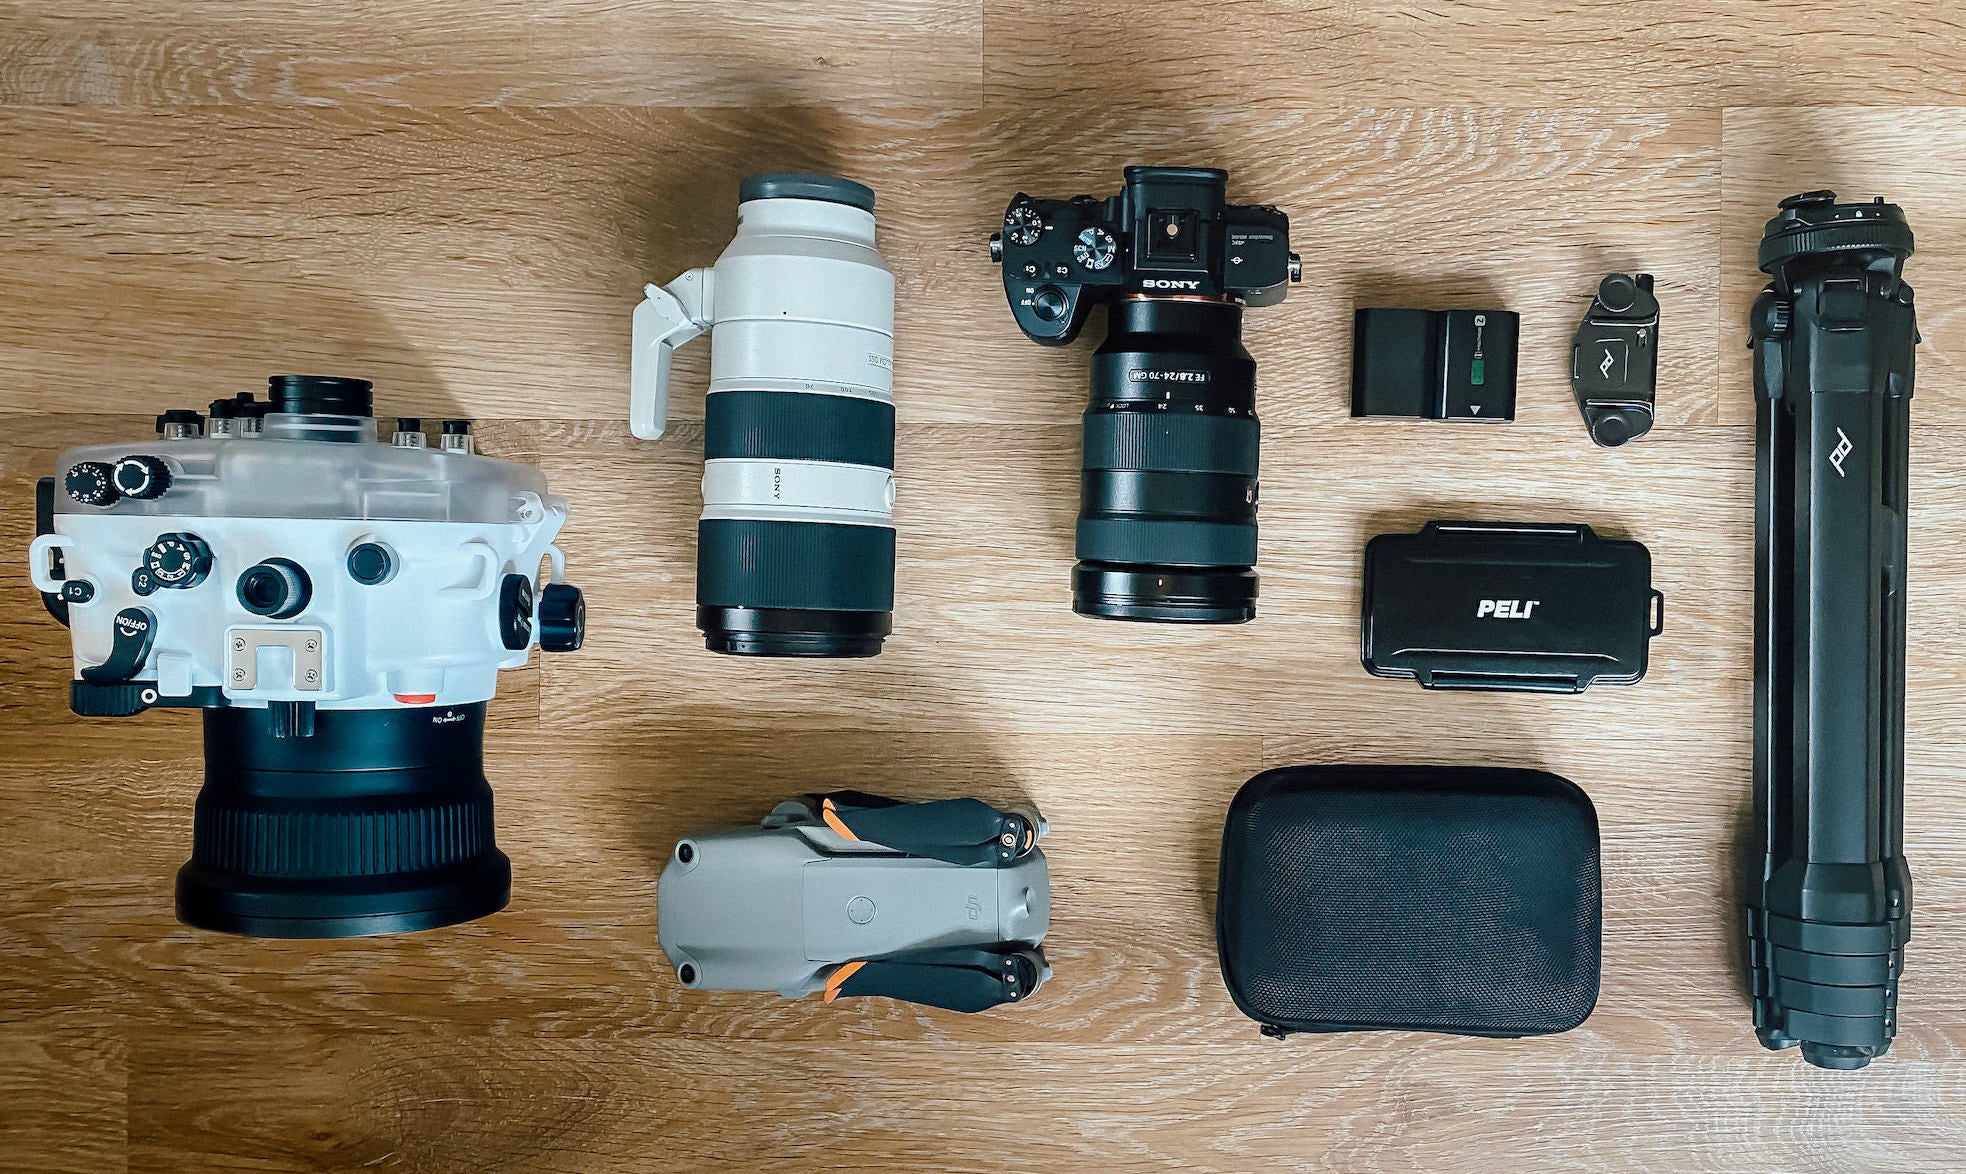 Beth Squire's gear for outdoor photography